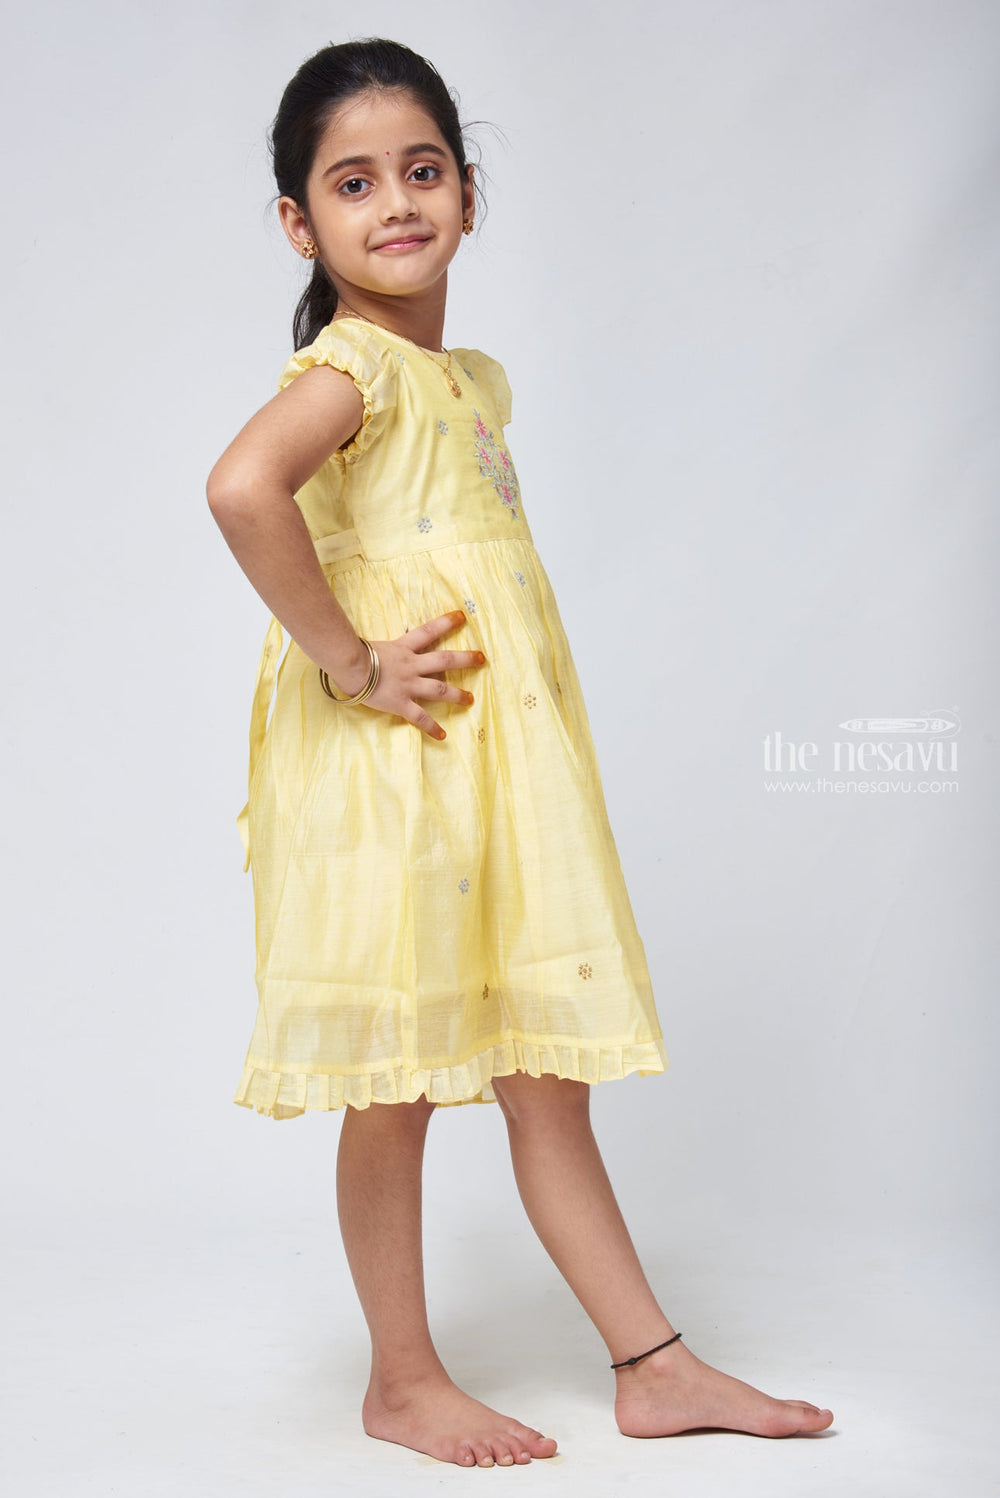 The Nesavu Frocks & Dresses Yellow Cotton Frock with Floral Embroidered Butta - Designer Charm Nesavu Floral Embroidered Cotton Frock | Cotton Frock for Girls | The Nesavu